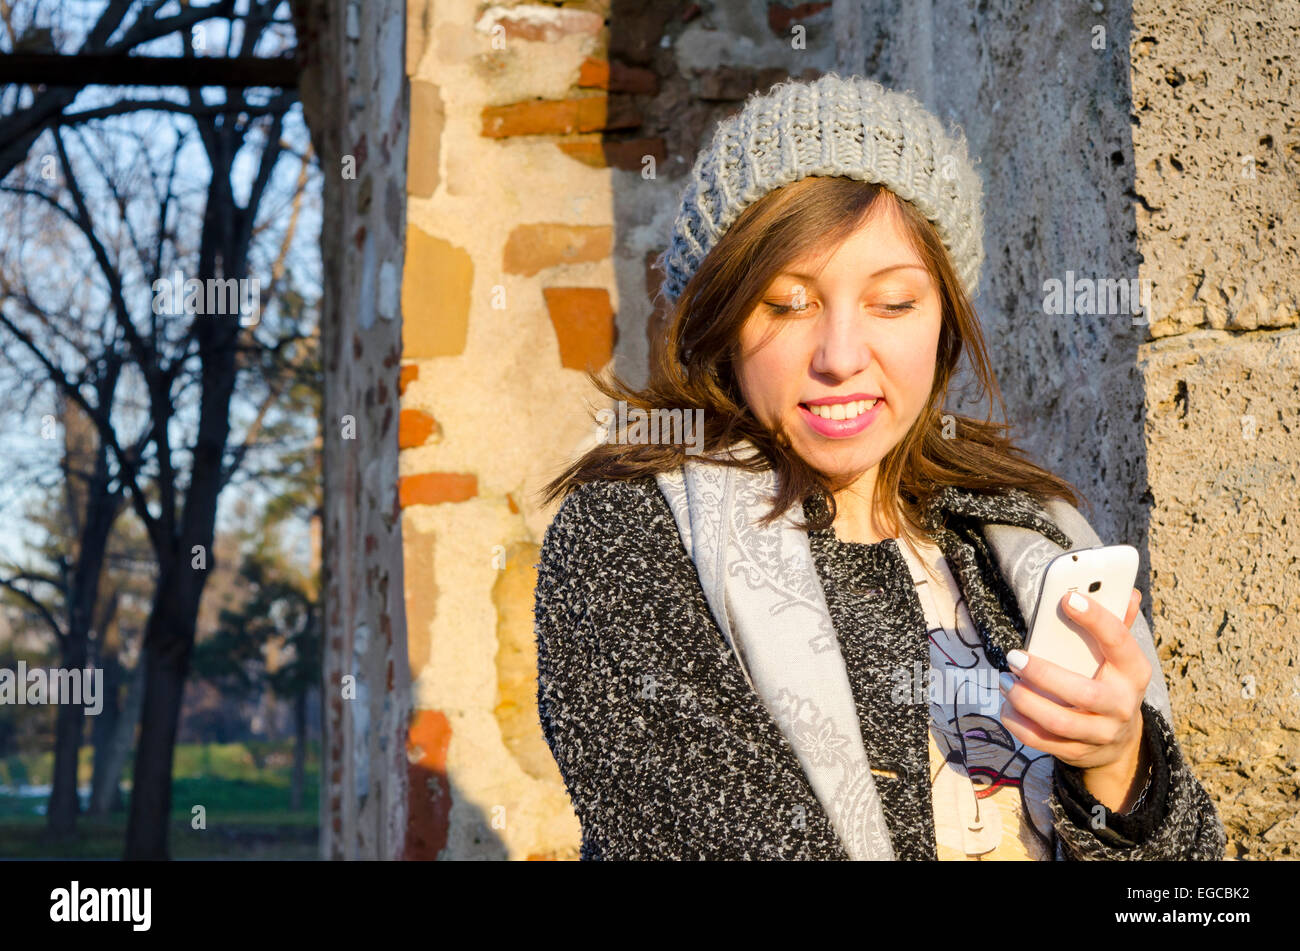 Smiling girl reading a message on her smartphone outdoors in a park Stock Photo